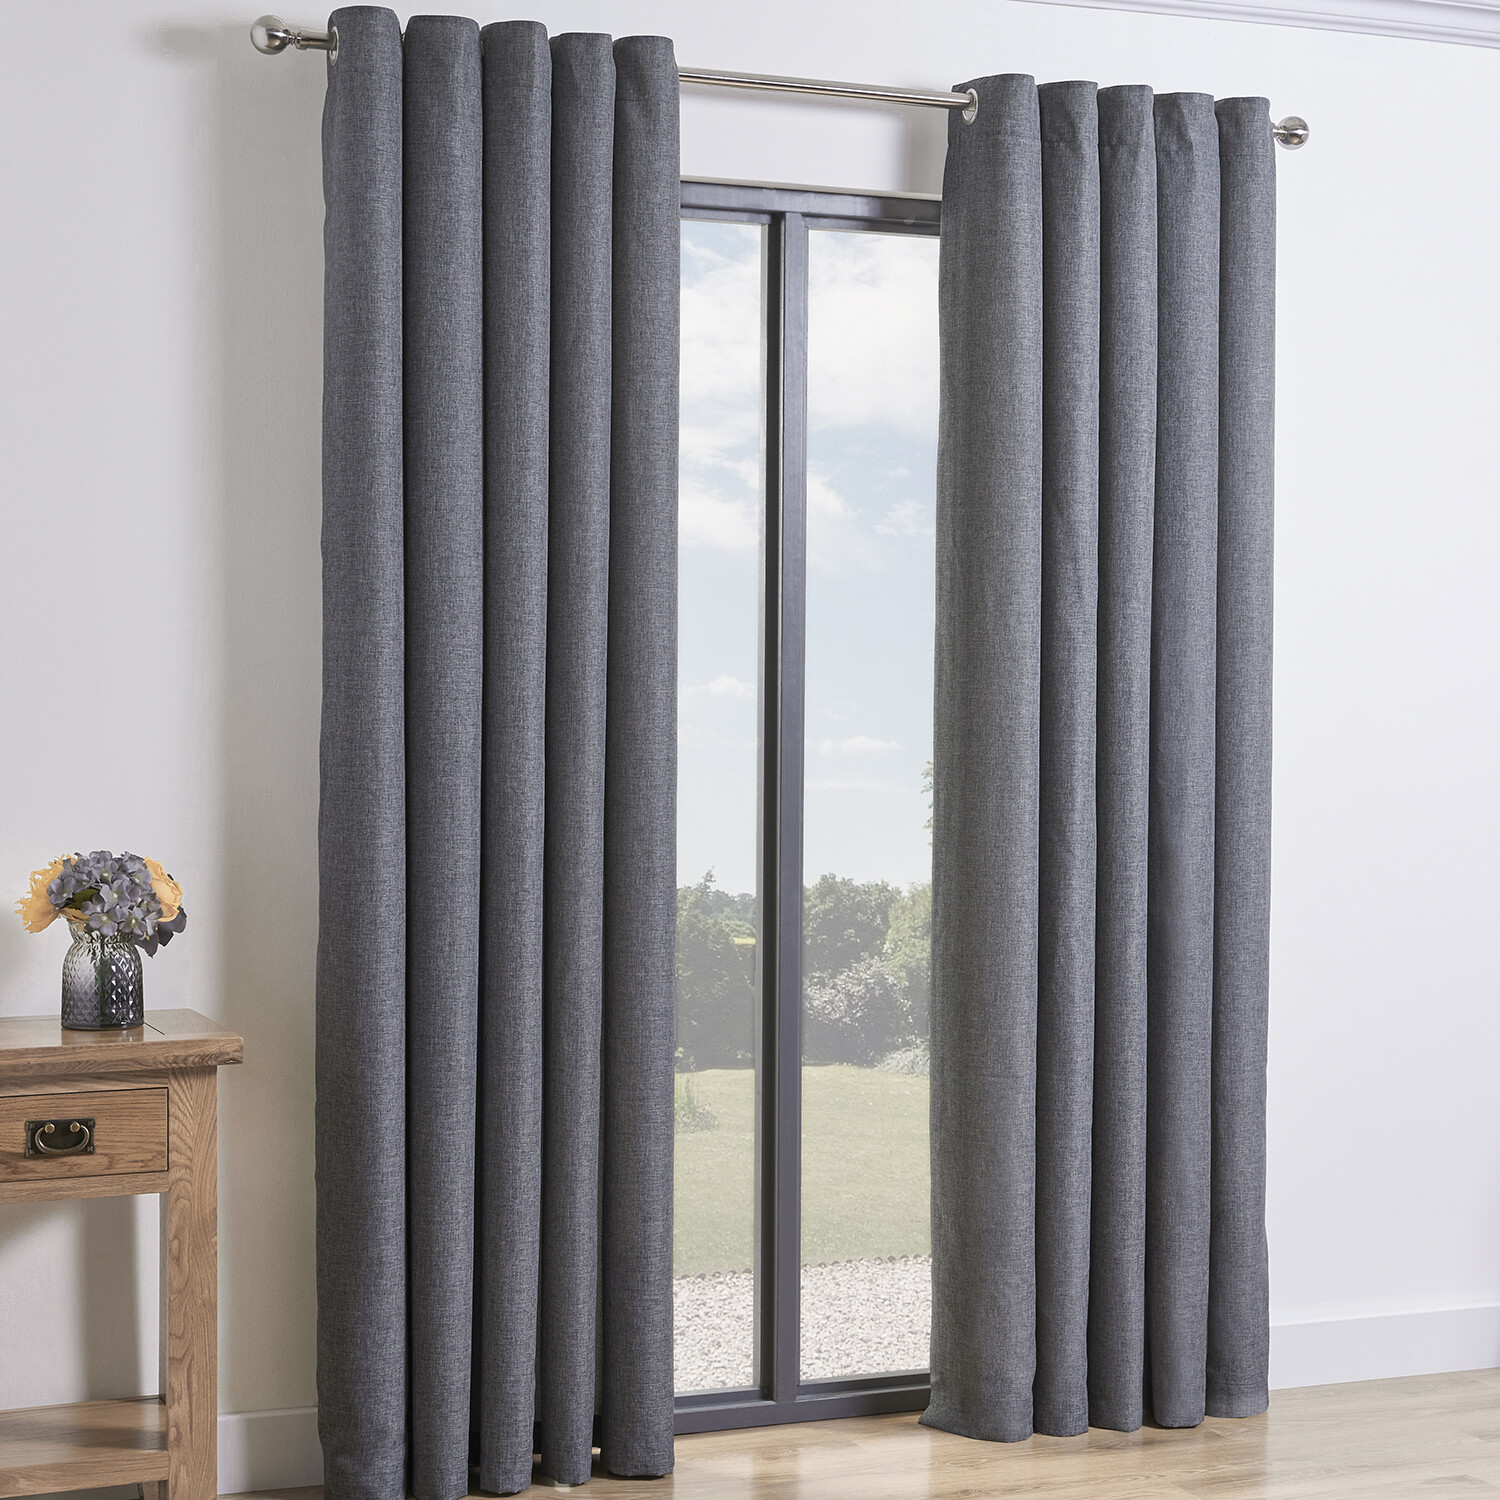 My Home Taylor Charcoal Blackout Eyelet Curtains 137 x 168cm Image 1